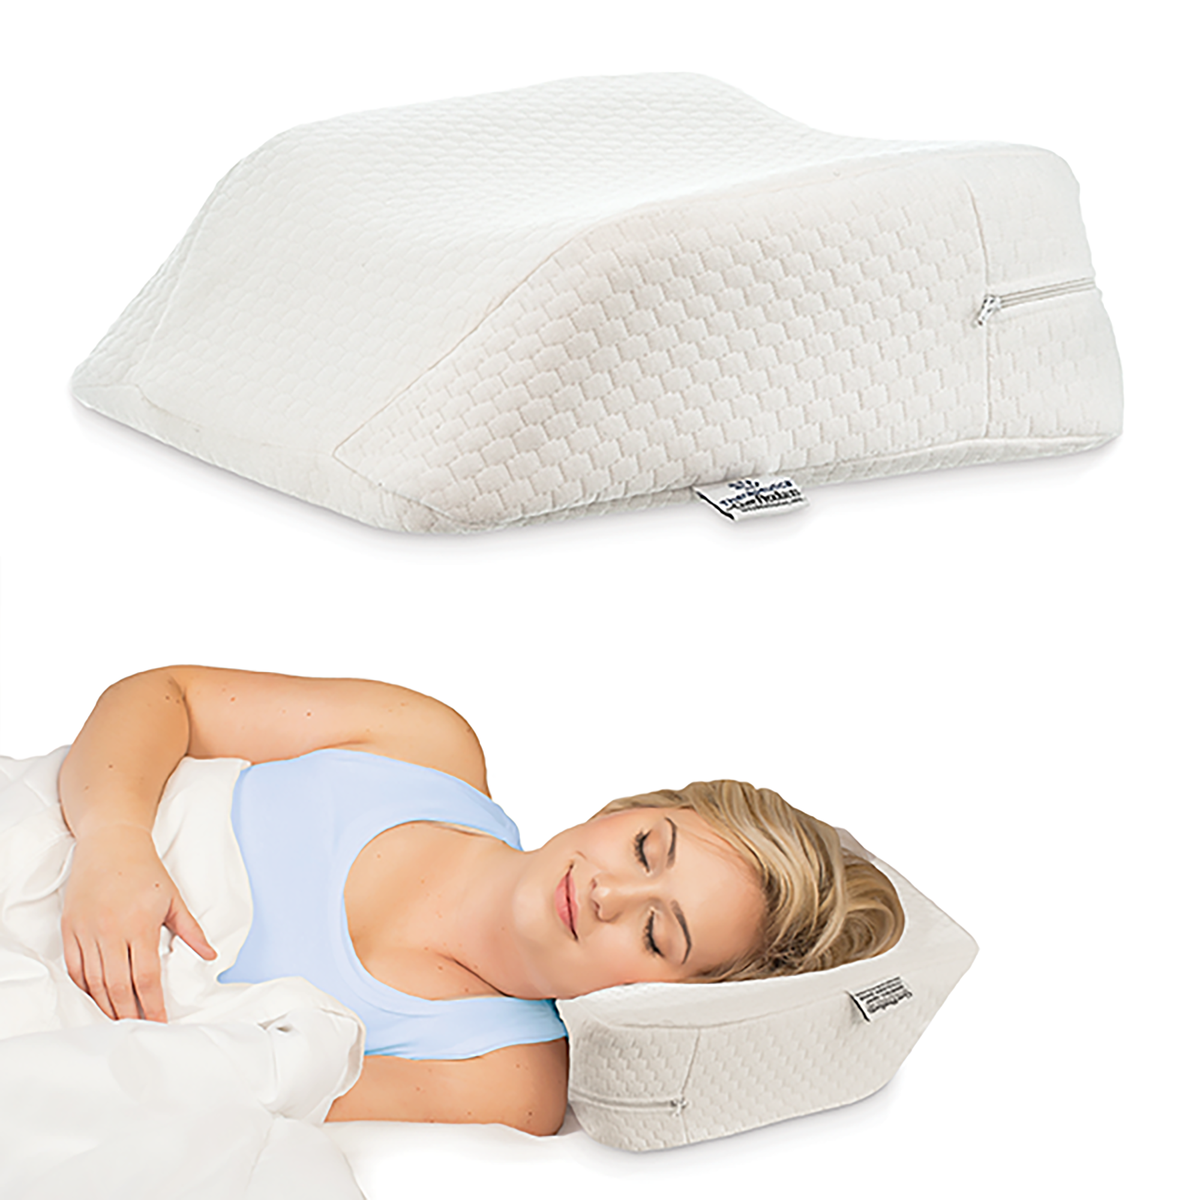 Therapeutica Orthopedic Cervical Travel Pillow